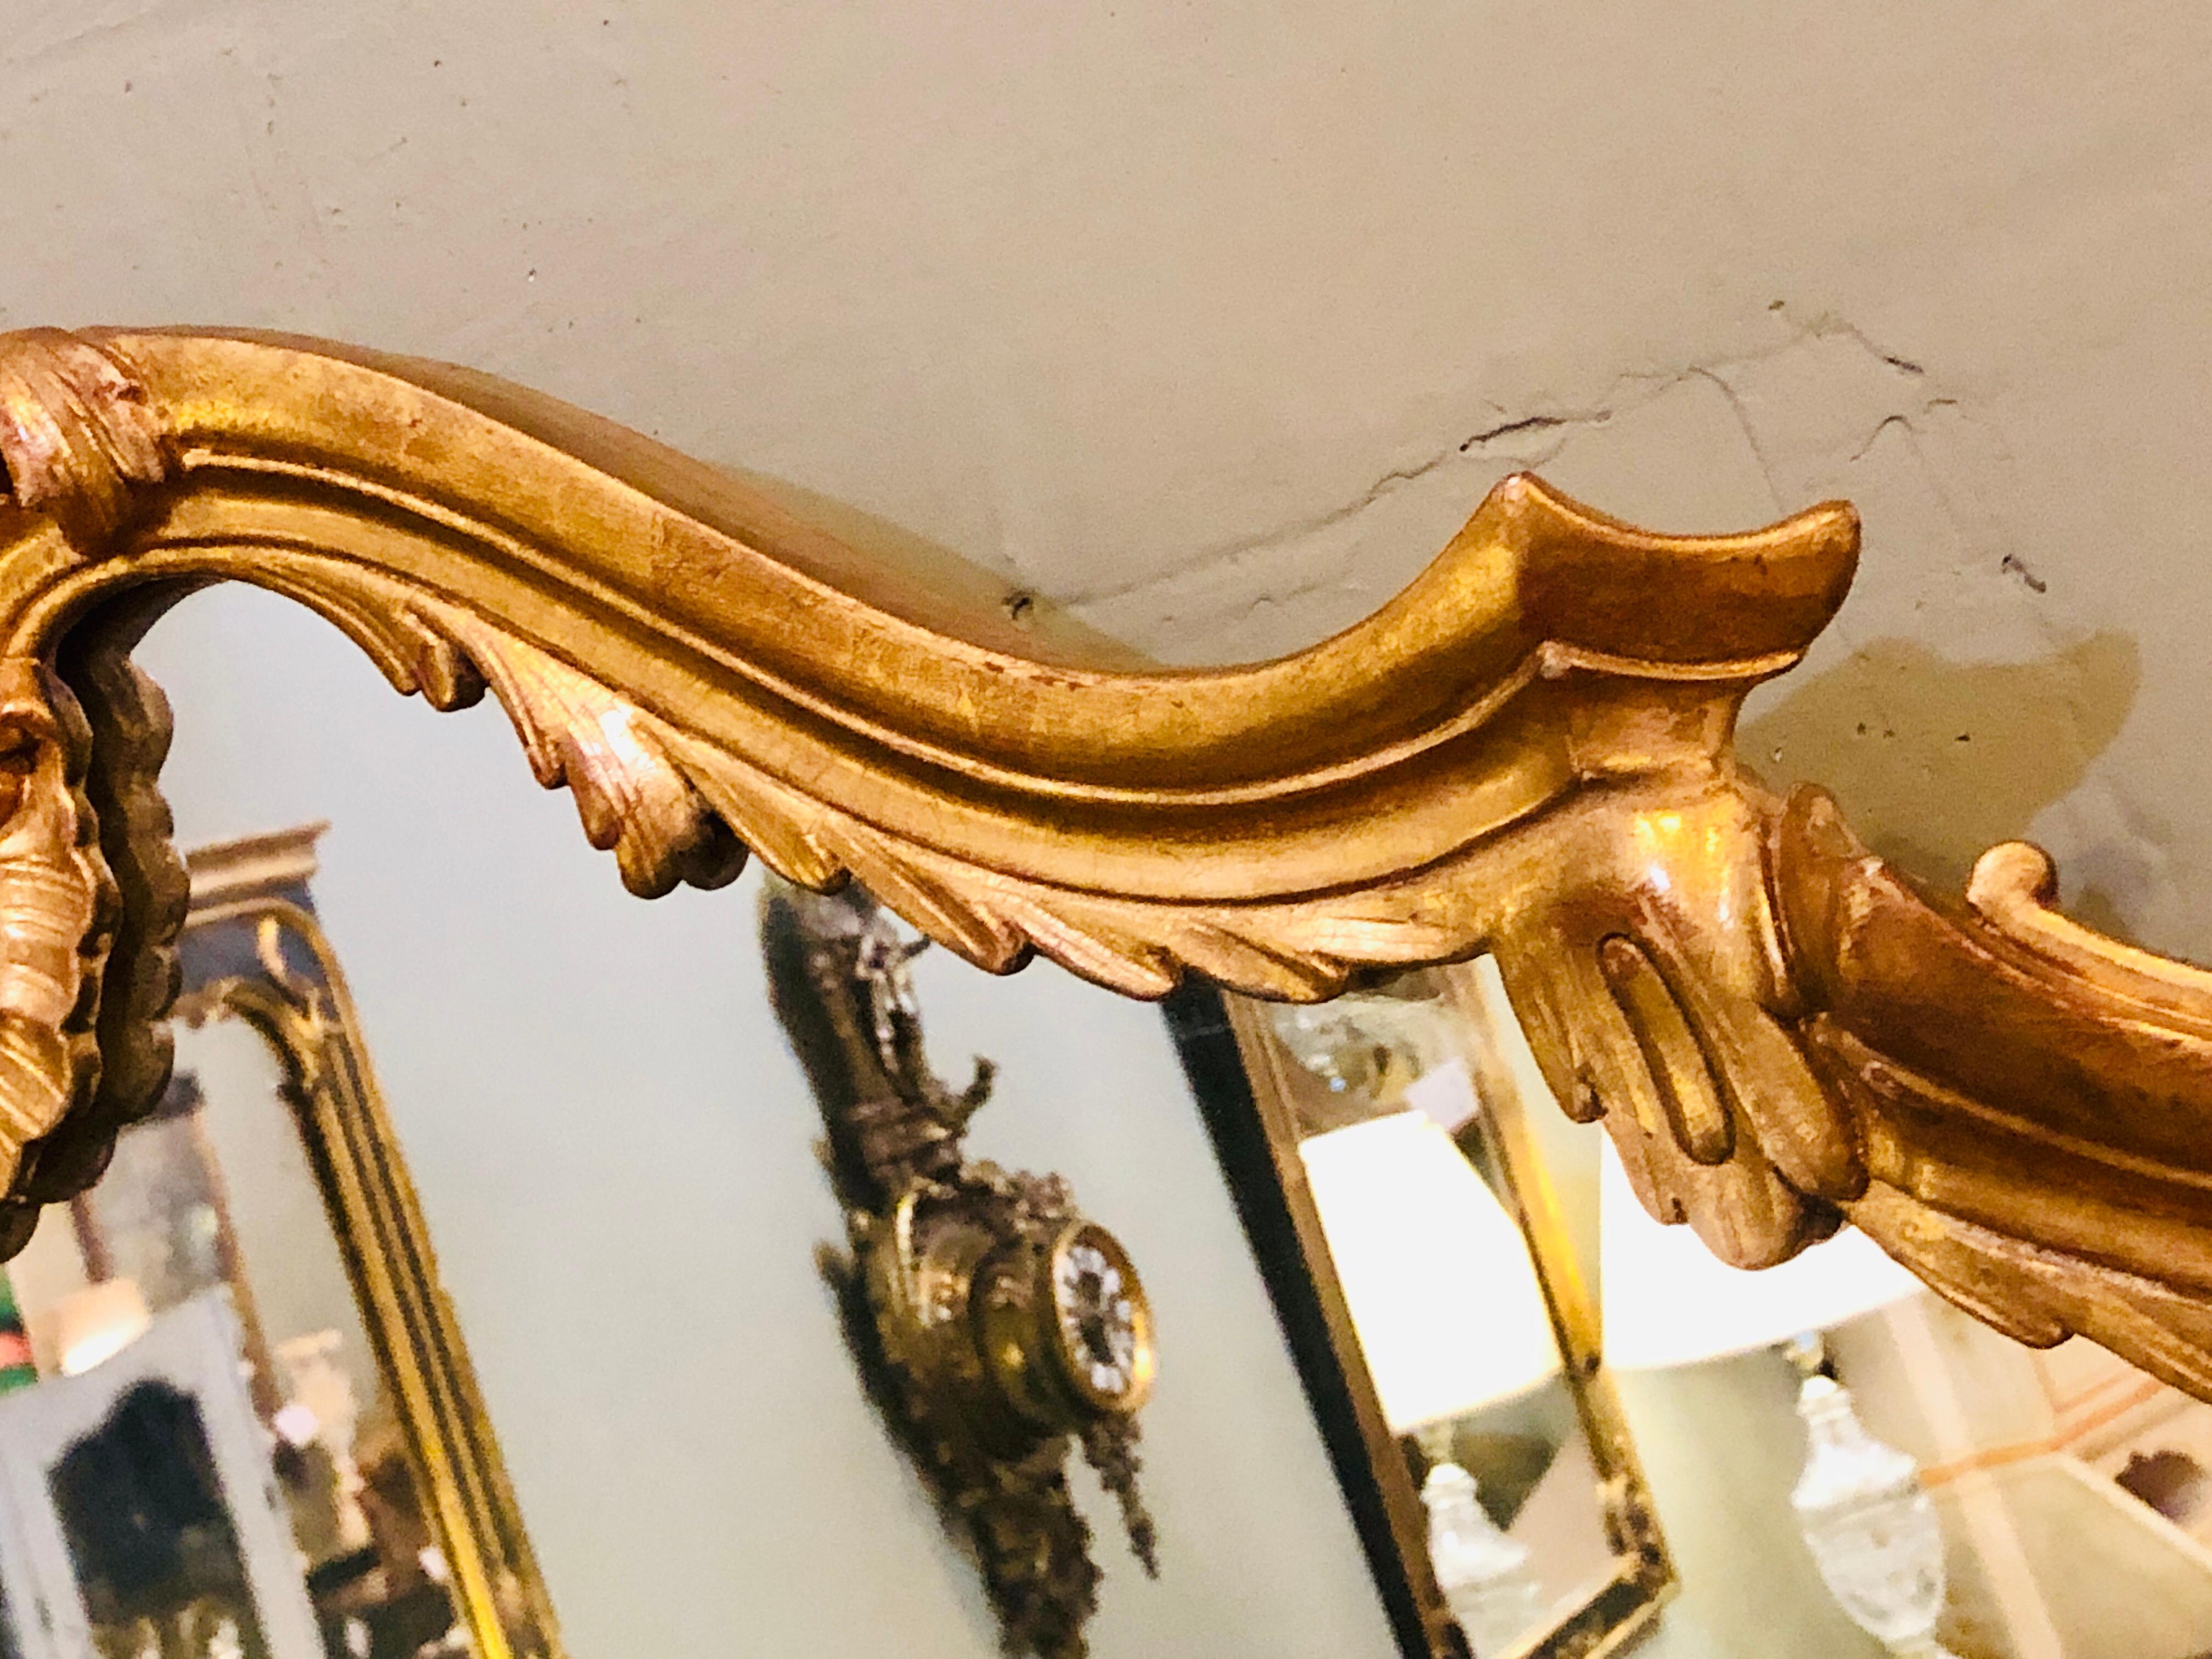 A large over the mantel sideboard or console mirror in a carved giltwood frame. This simply stunning mirror is certain to add the right reflection to any home or office.